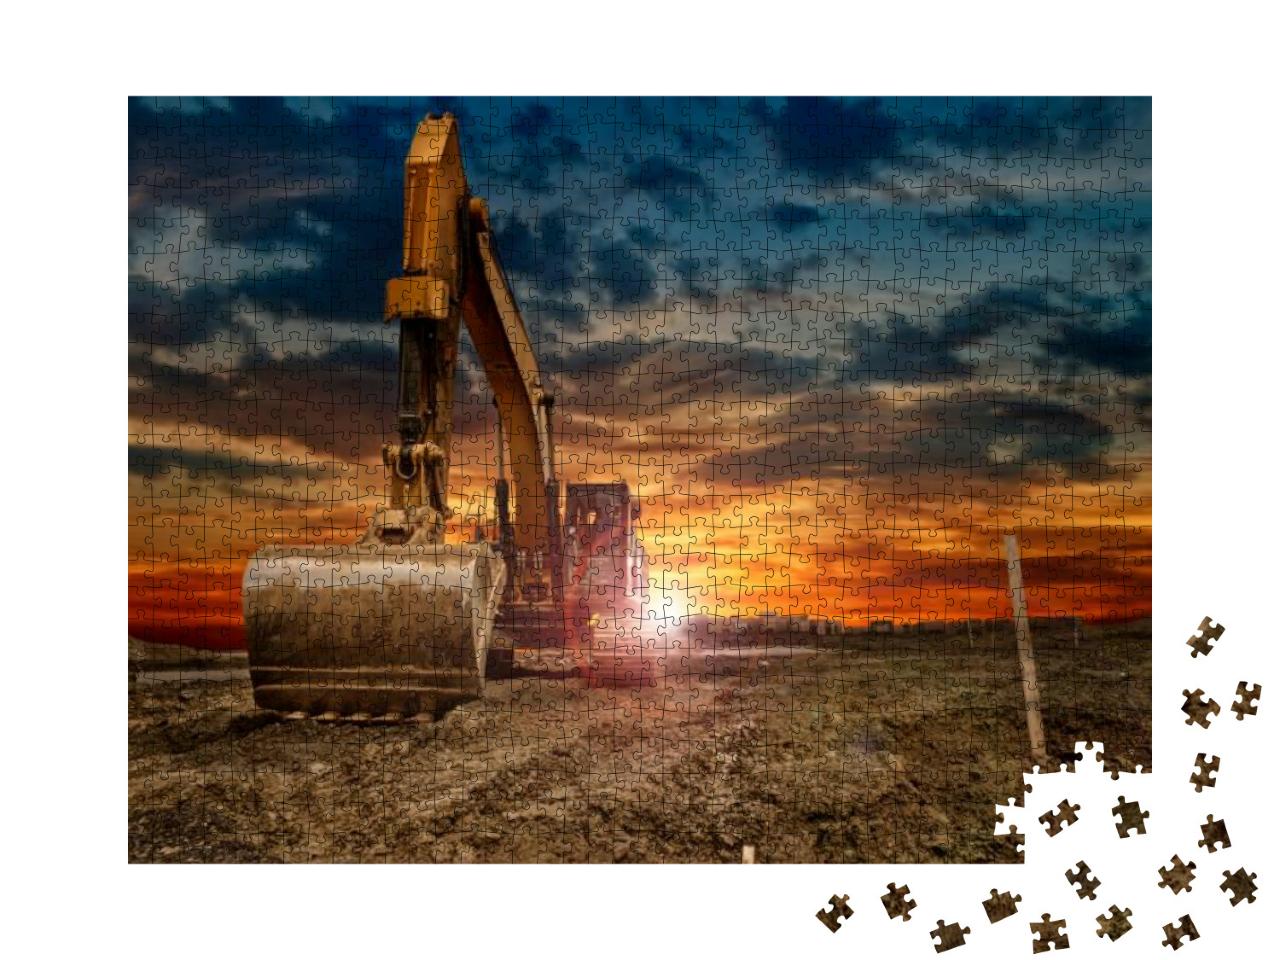 Excavating Machinery At the Construction Site, Sunset in... Jigsaw Puzzle with 1000 pieces